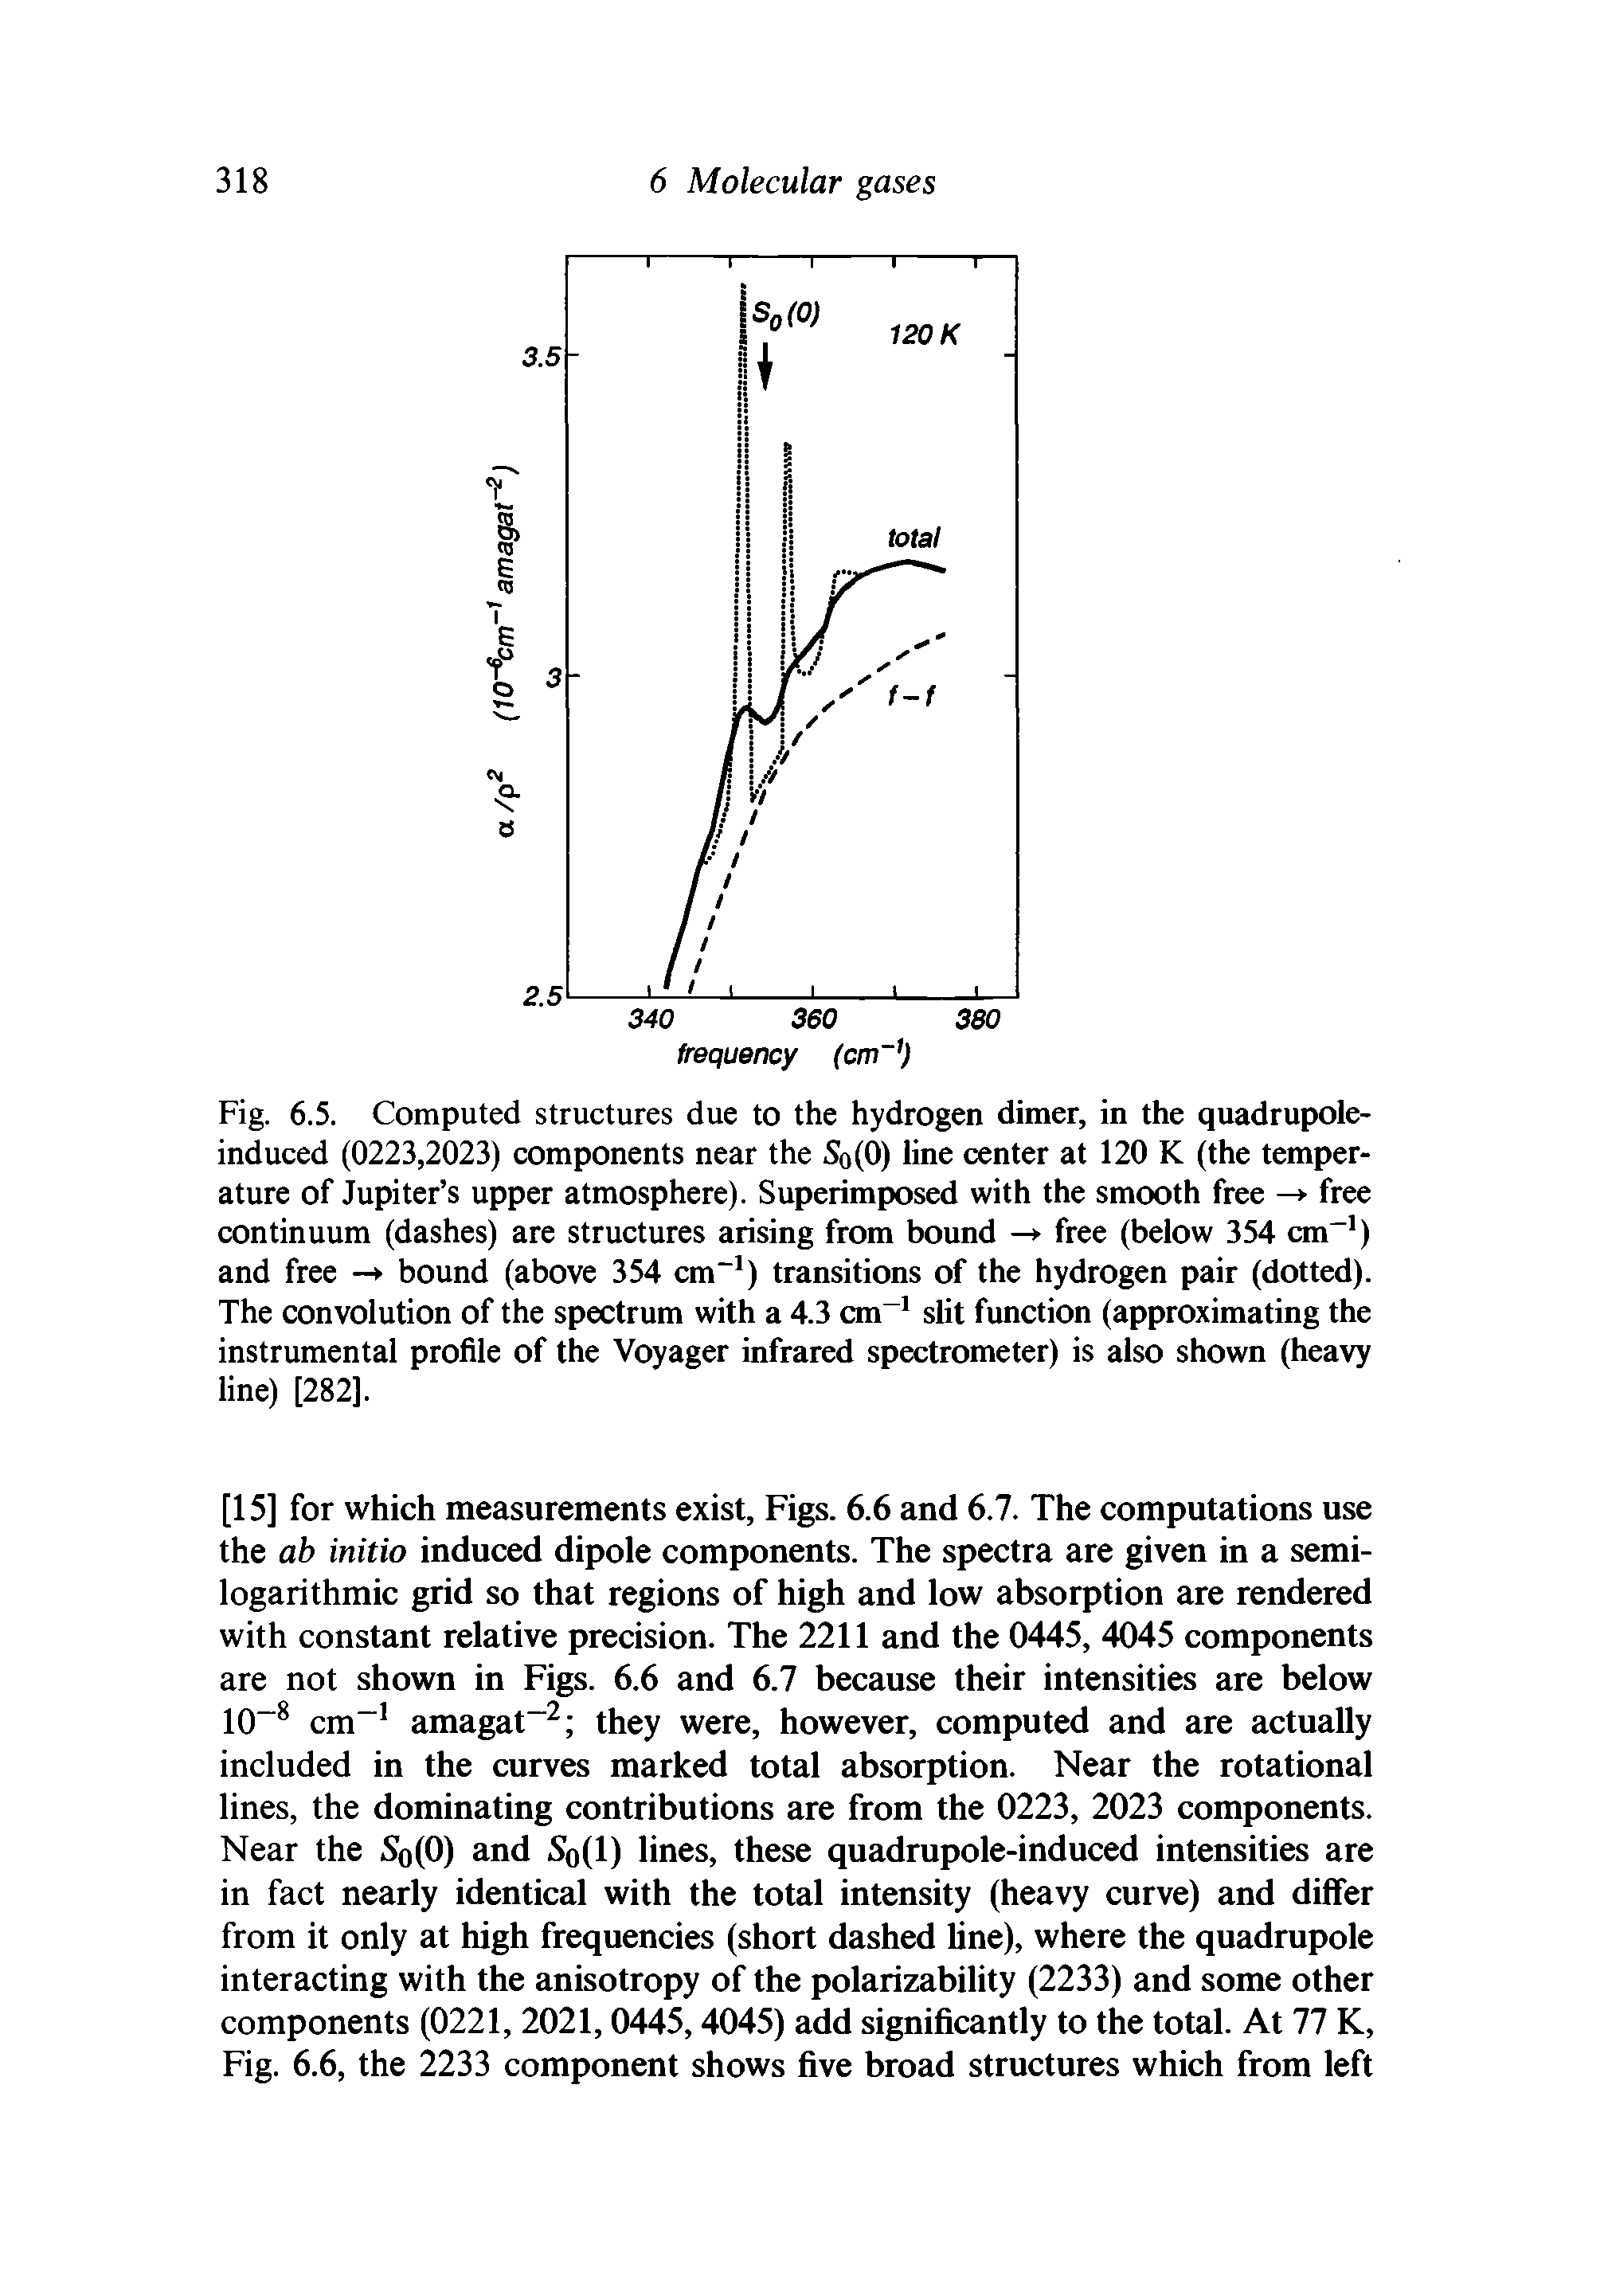 Fig. 6.5. Computed structures due to the hydrogen dimer, in the quadrupole-induced (0223,2023) components near the So(0) line center at 120 K (the temperature of Jupiter s upper atmosphere). Superimposed with the smooth free — free continuum (dashes) are structures arising from bound — free (below 354 cm-1) and free - bound (above 354 cm-1) transitions of the hydrogen pair (dotted). The convolution of the spectrum with a 4.3 cm-1 slit function (approximating the instrumental profile of the Voyager infrared spectrometer) is also shown (heavy line) [282].